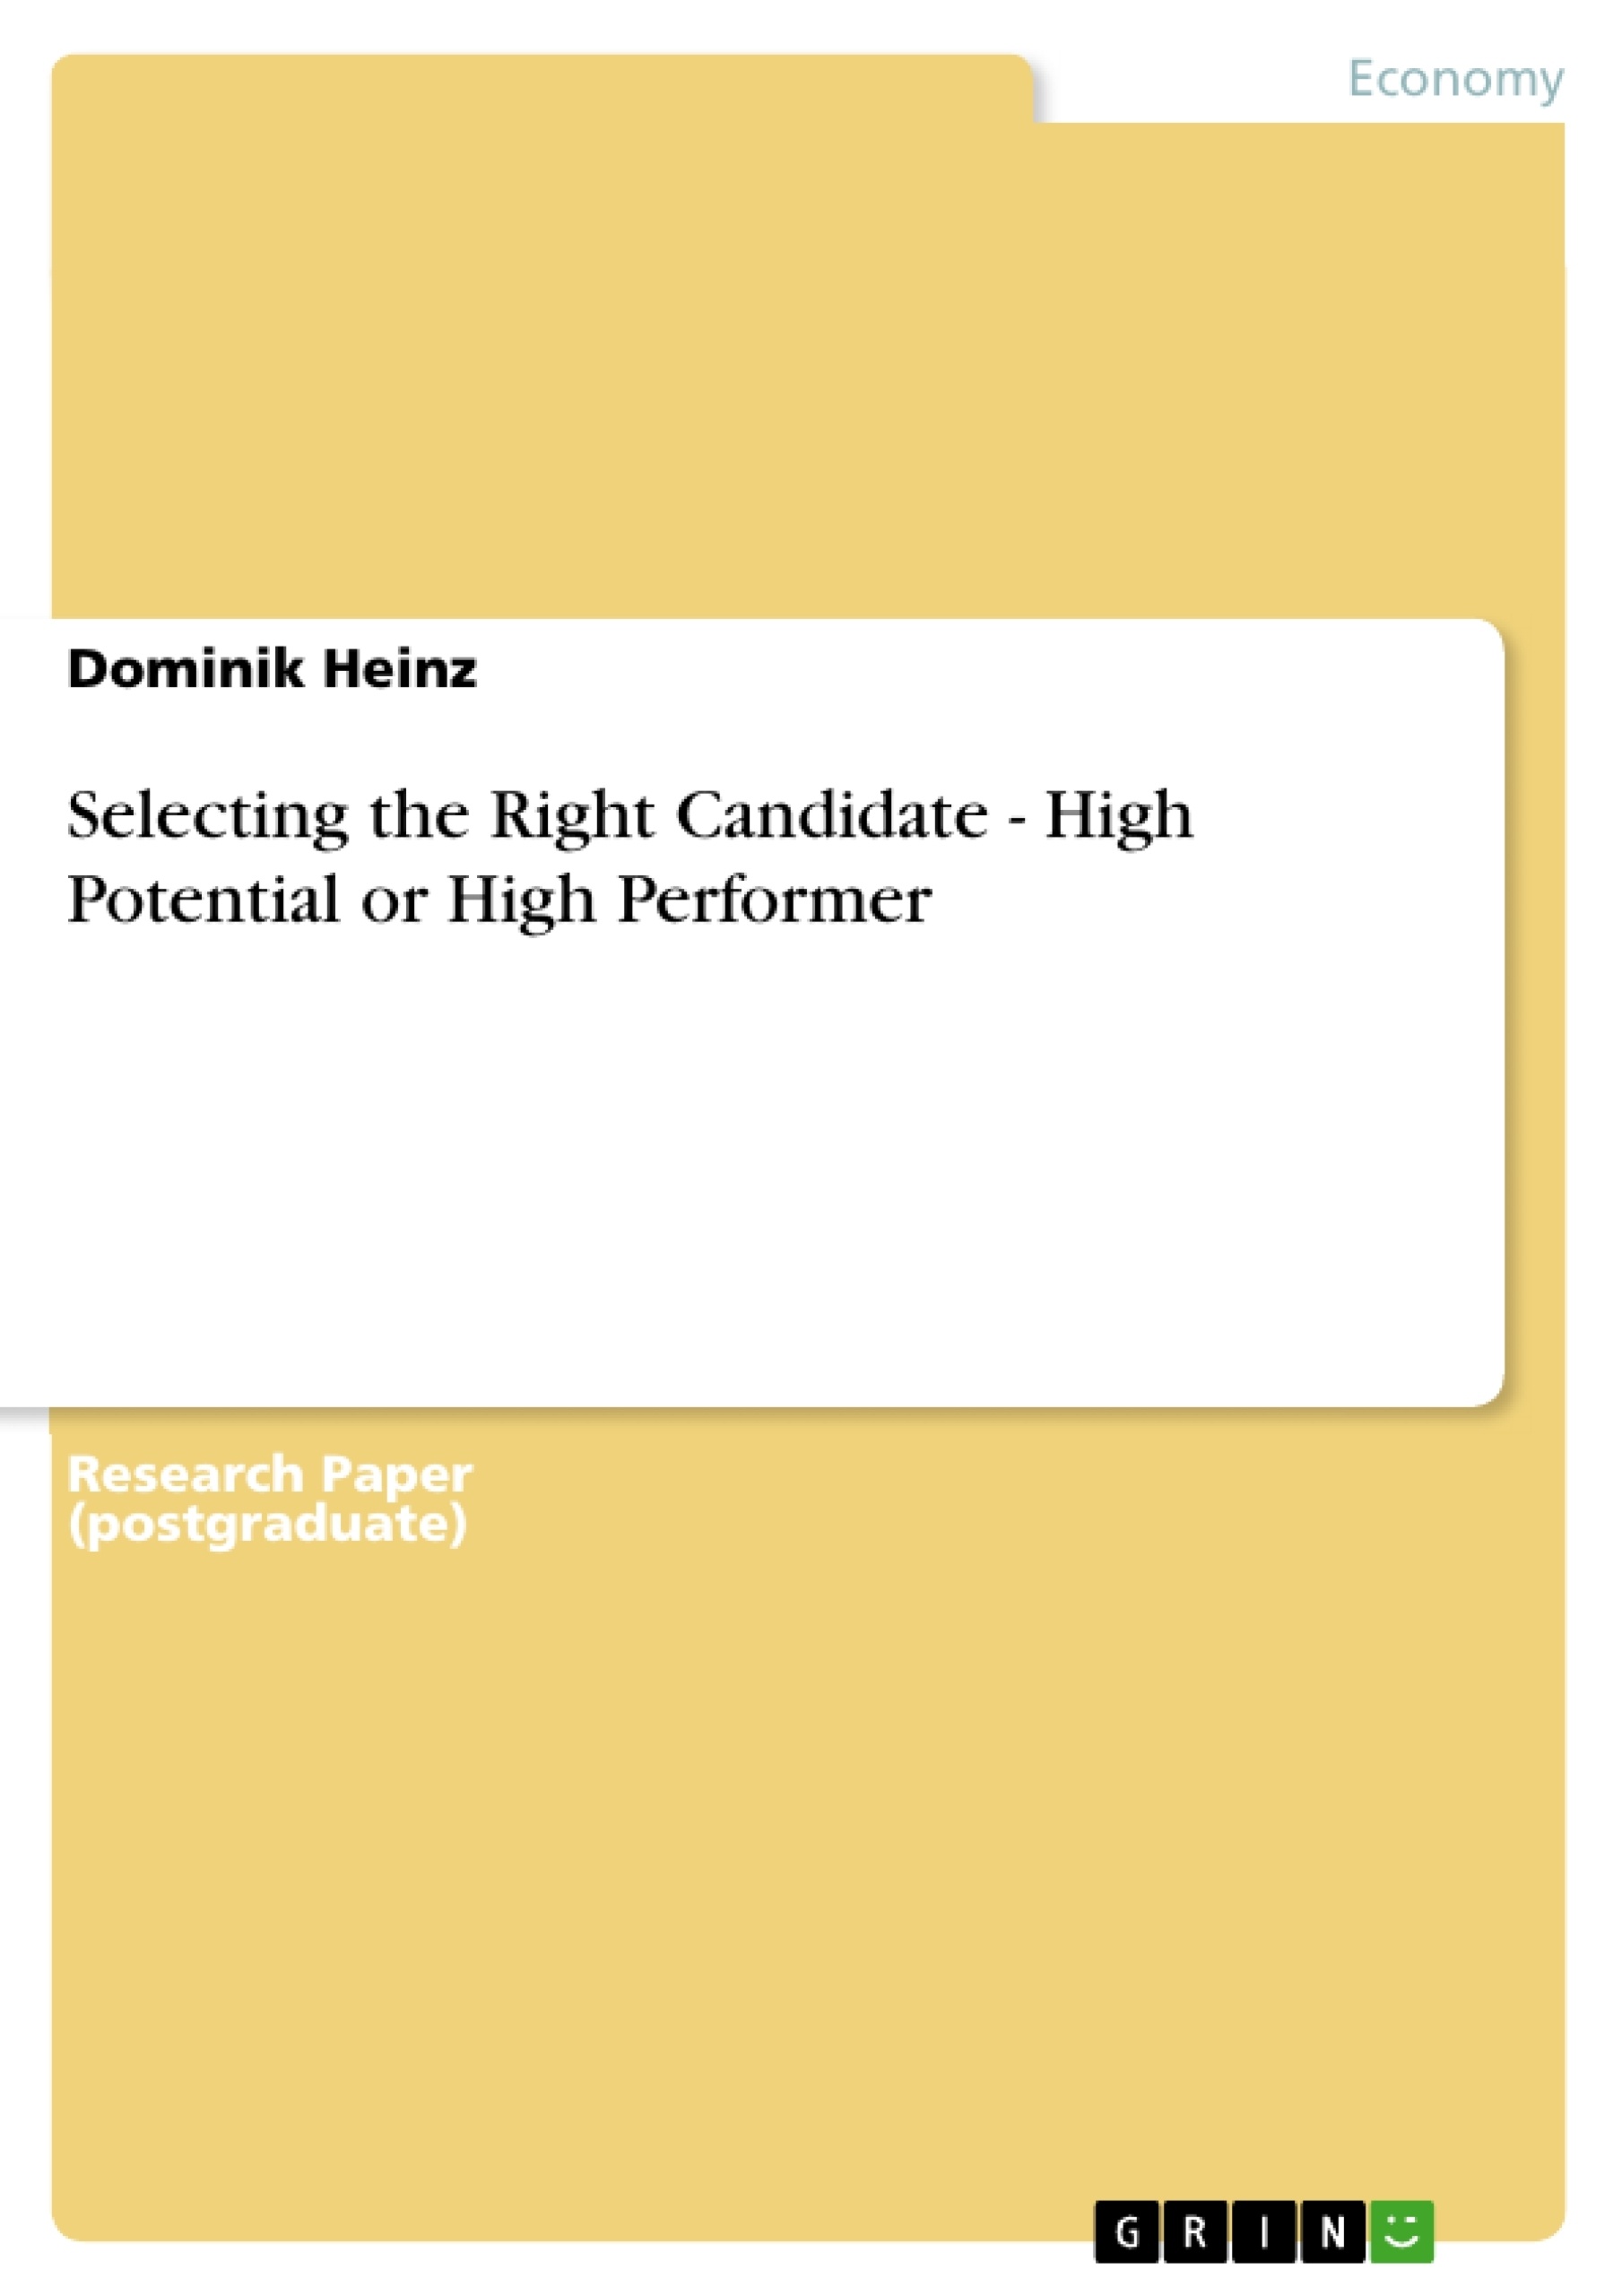 Título: Selecting the Right Candidate - High Potential or High Performer